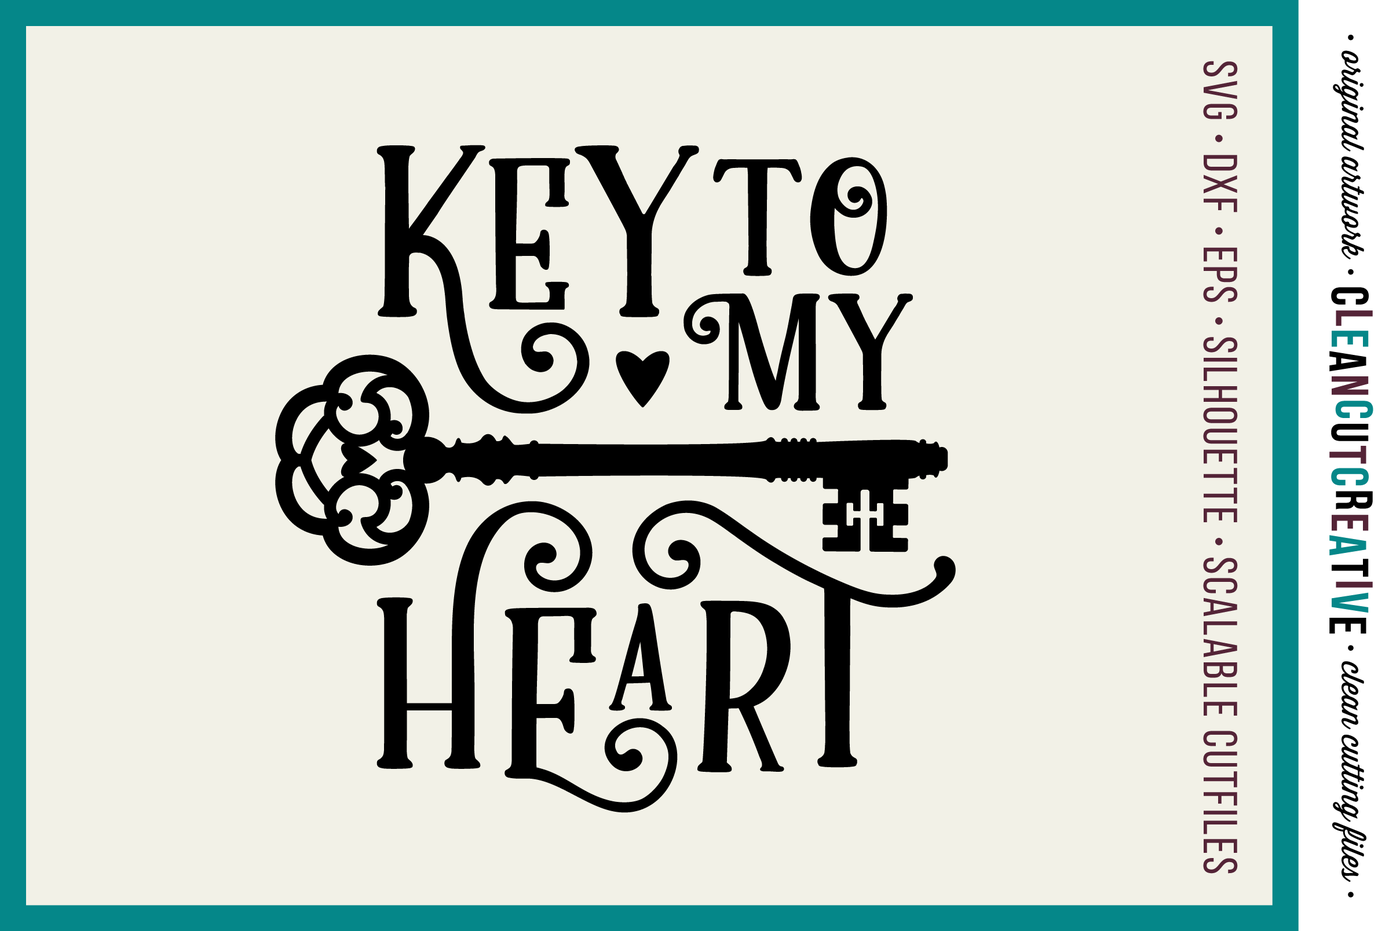 Download Key to my Heart - Love Cutfile Vintage Key - SVG DXF EPS ...